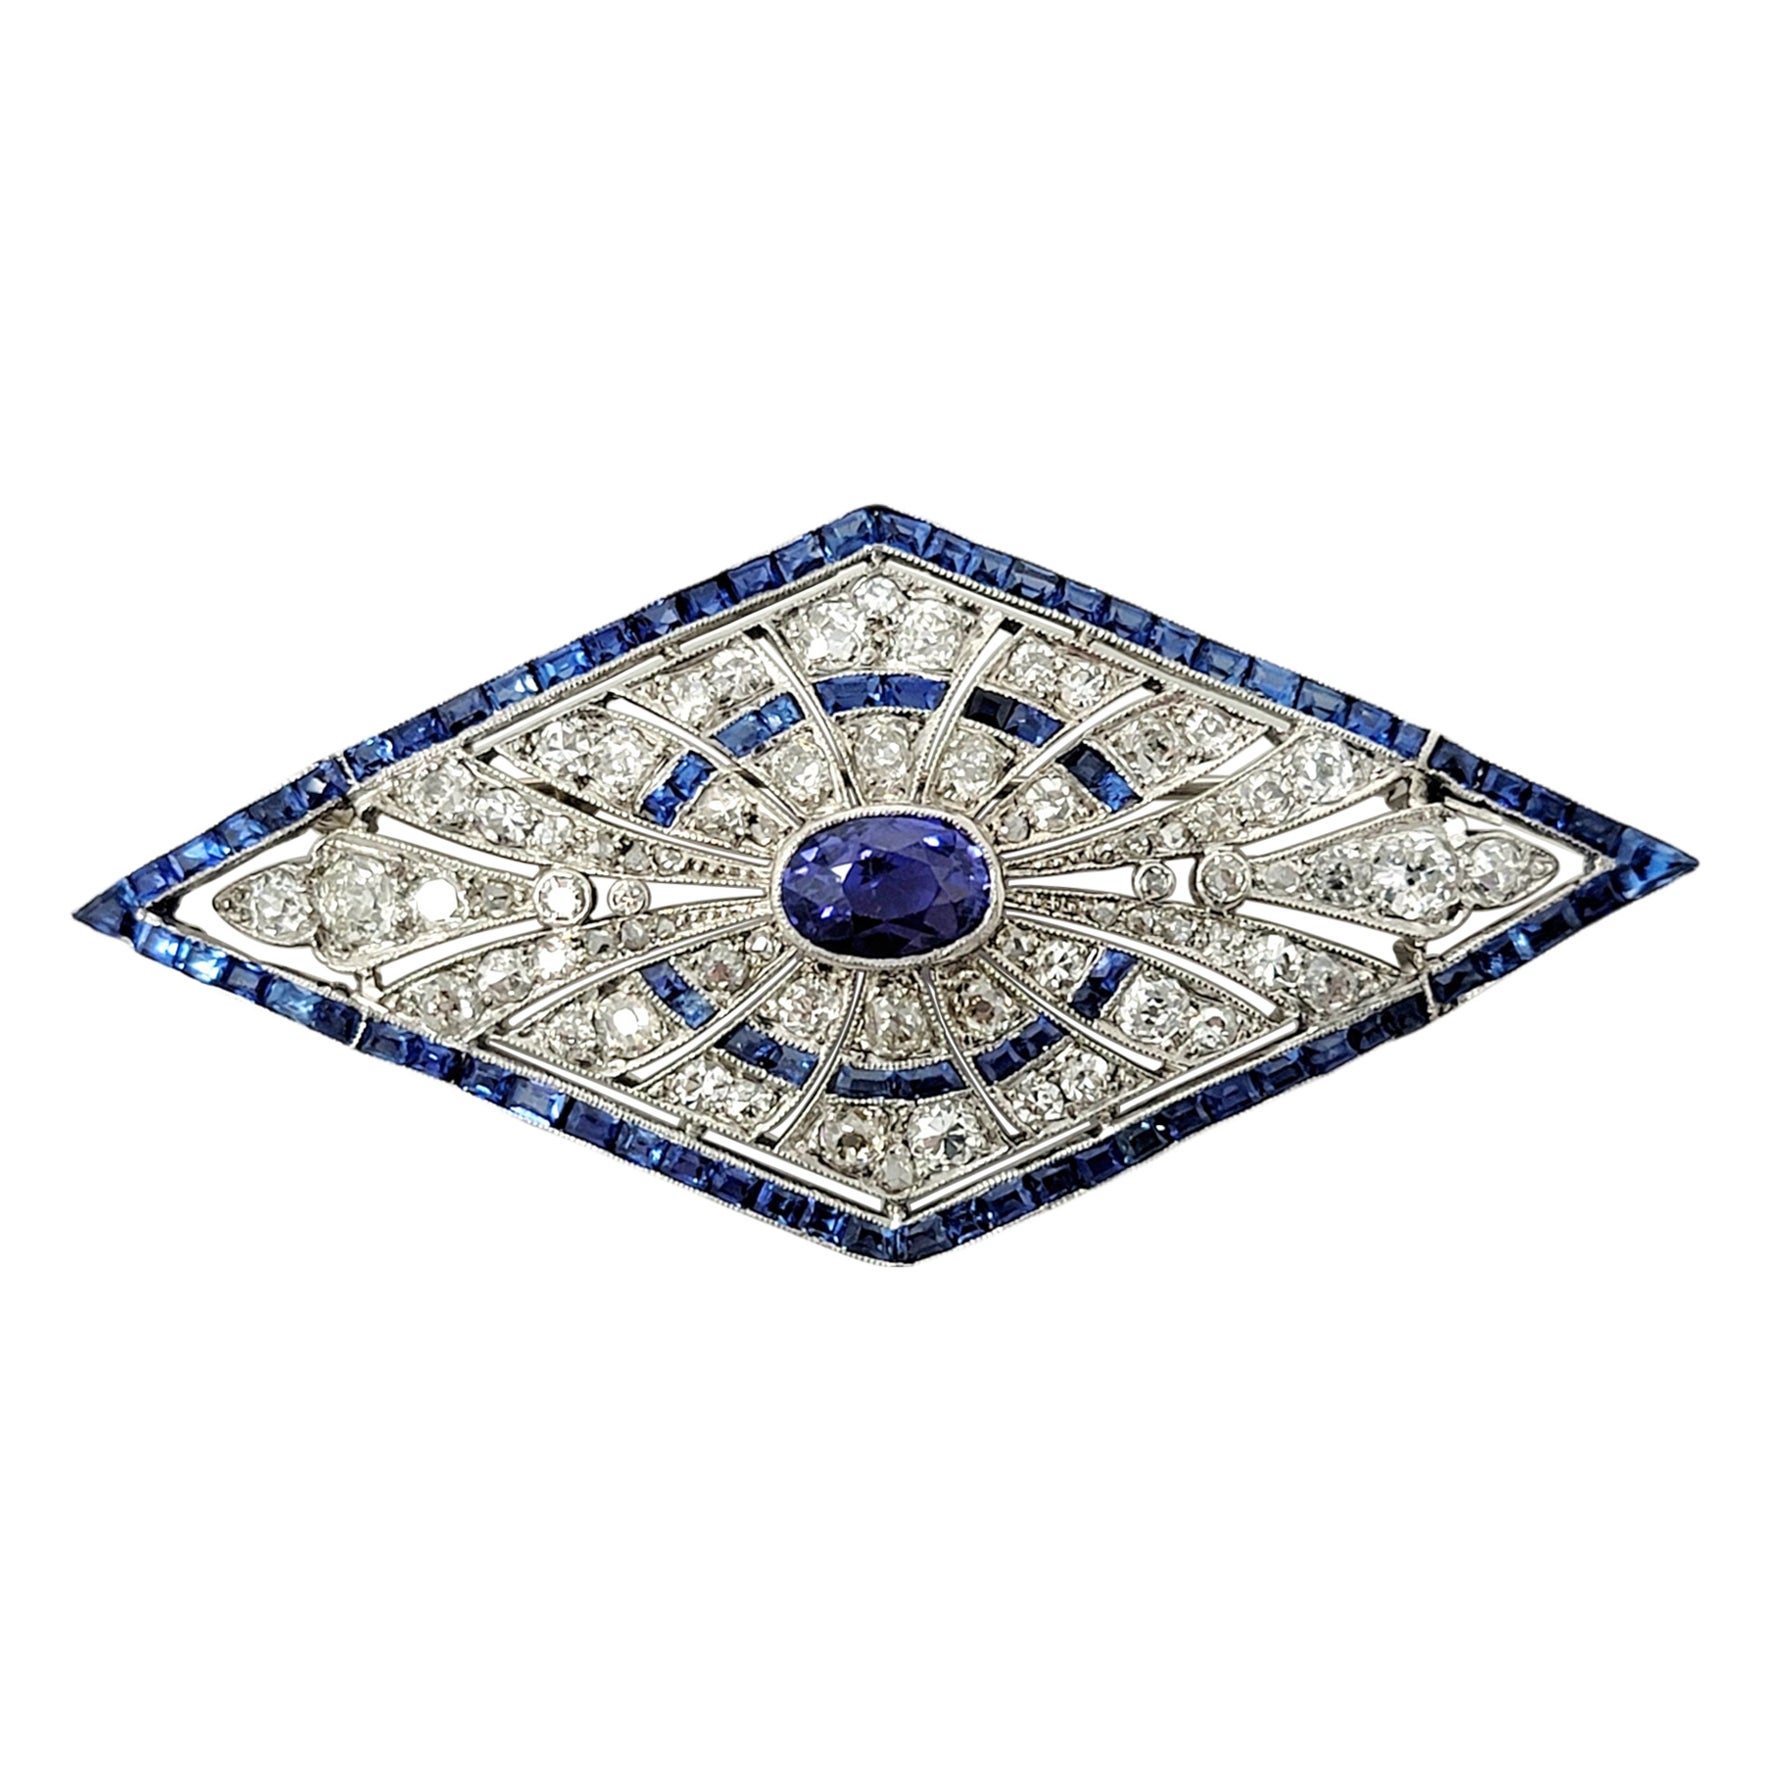 Vintage Oval Mixed Cut Sapphire and Diamond Brooch in Platinum 8.20 Carats Total